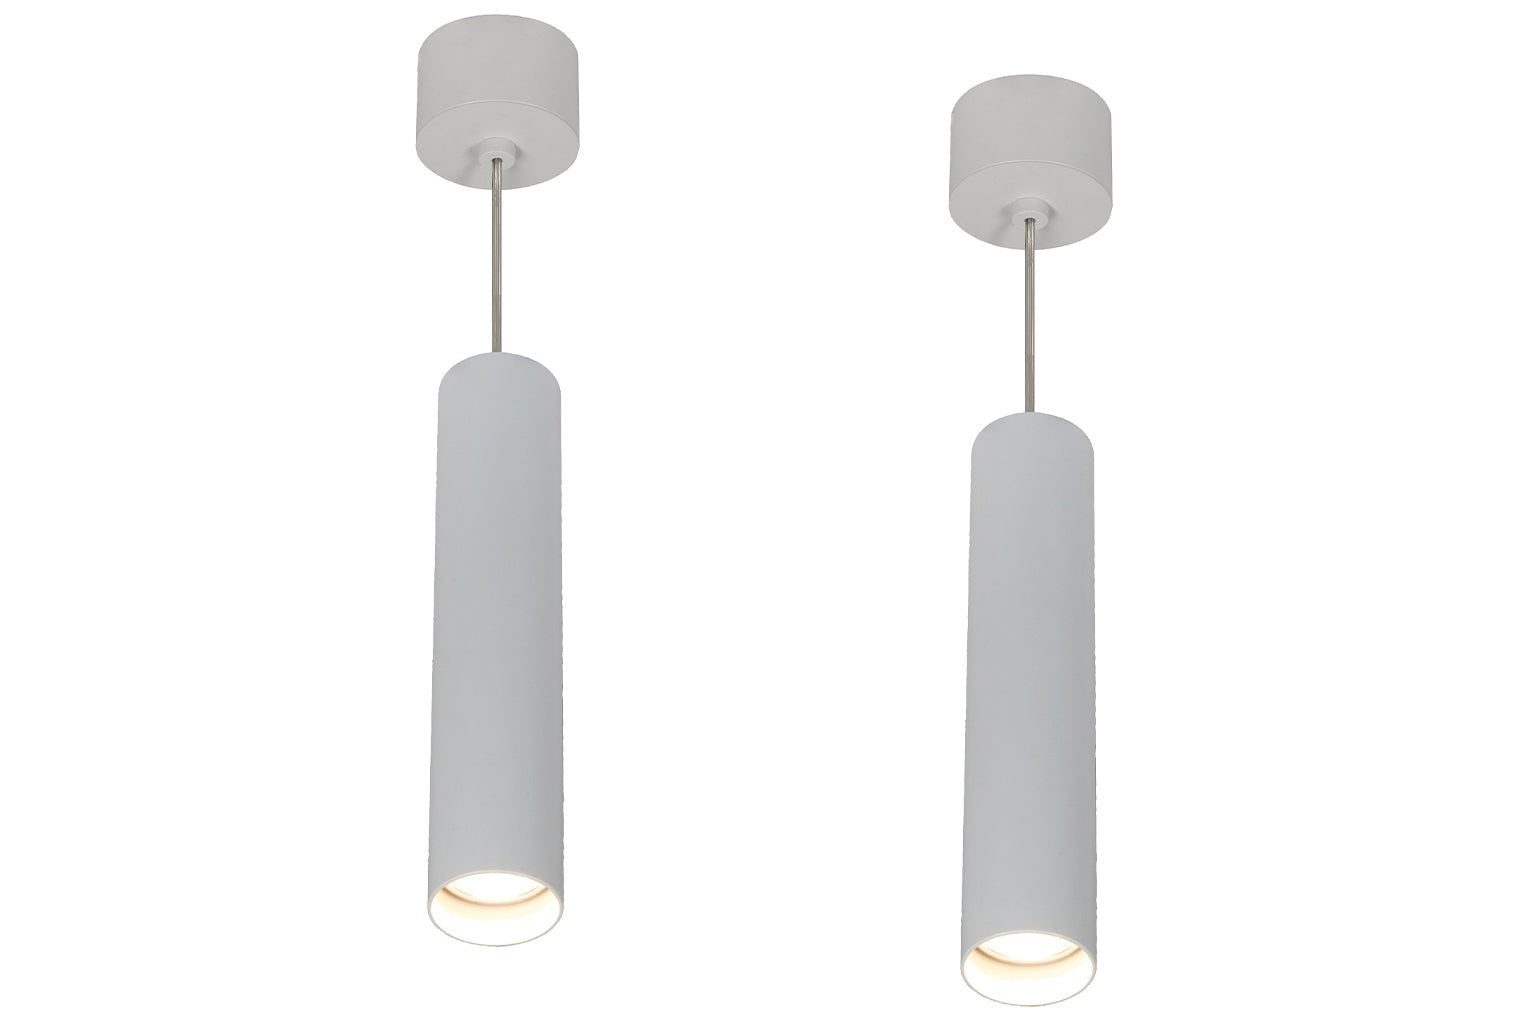 4lite High Output Dimmable 3K LED Ceiling Pendant Light - White (Pack of 2)